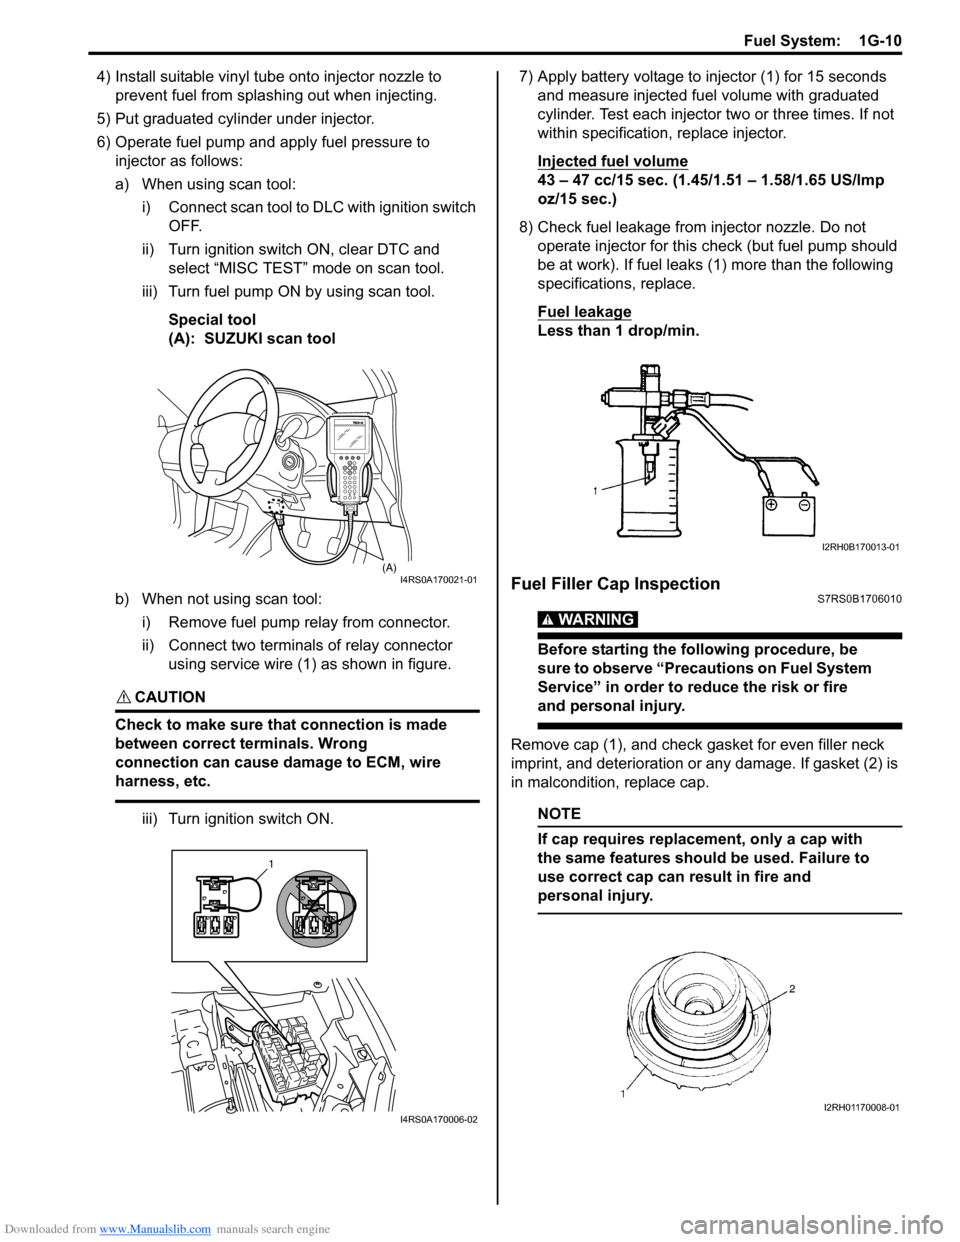 SUZUKI SWIFT 2006 2.G Service Service Manual Downloaded from www.Manualslib.com manuals search engine Fuel System:  1G-10
4) Install suitable vinyl tube onto injector nozzle to 
prevent fuel from splashing out when injecting.
5) Put graduated cy